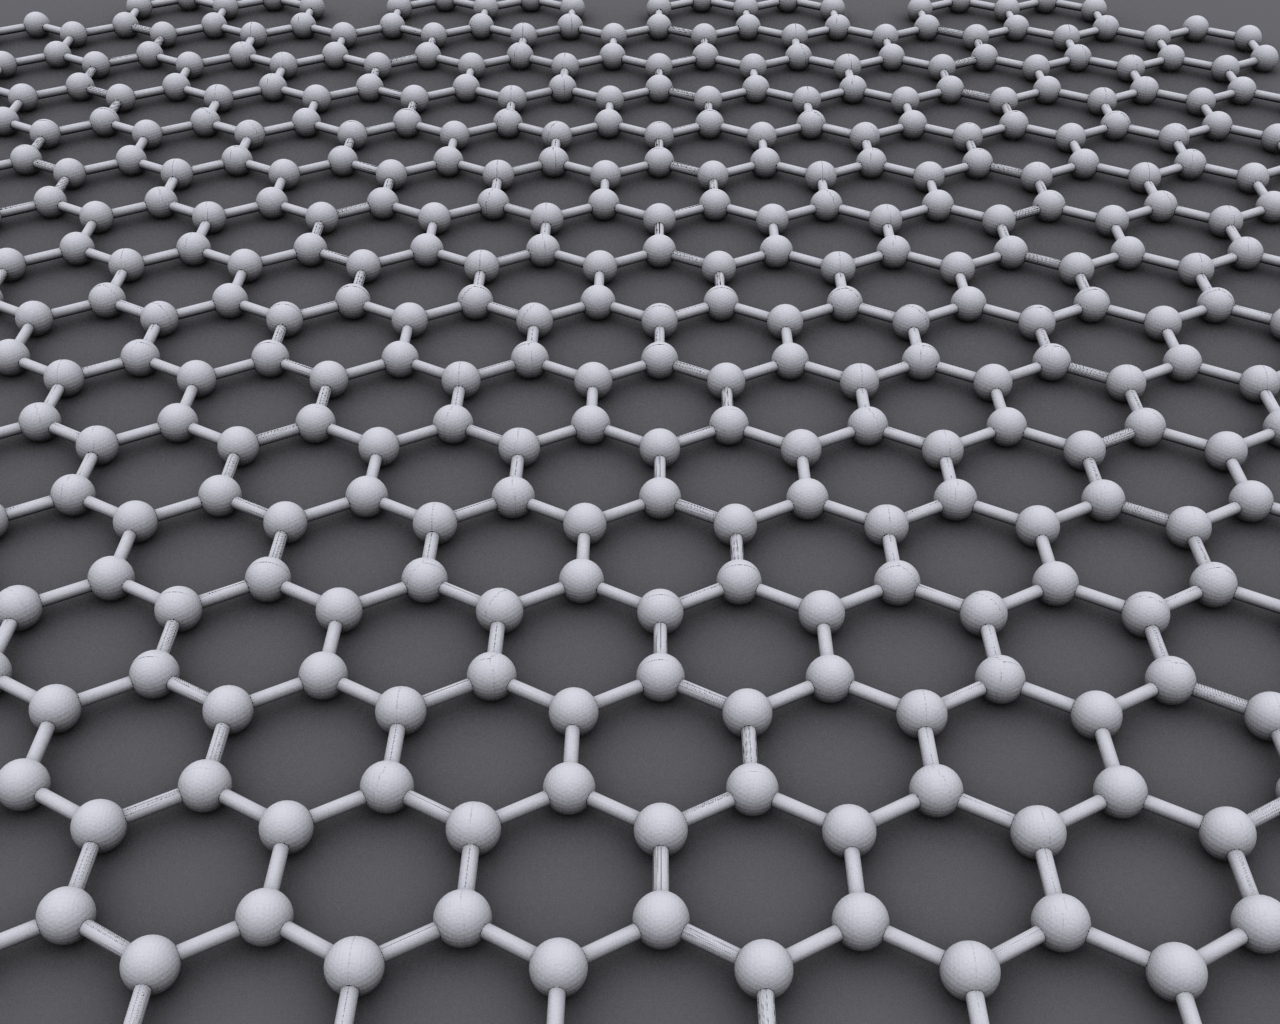 Paragraf Harnesses Graphene’s Power In Global Microchip Race